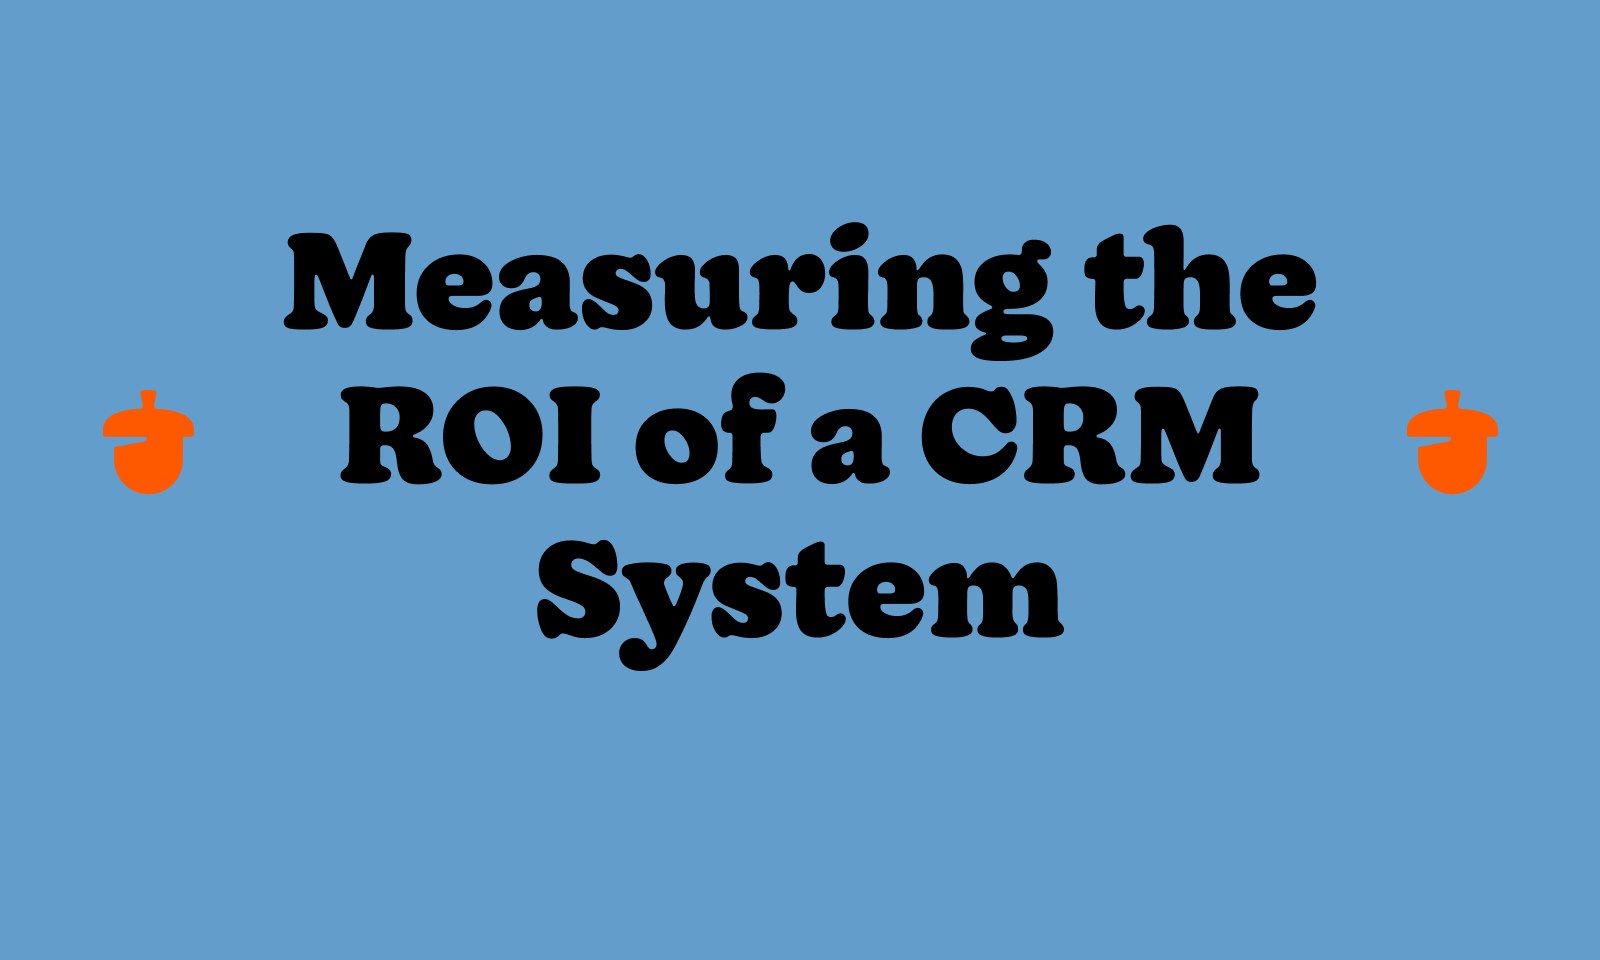 Measuring the ROI of a CRM system